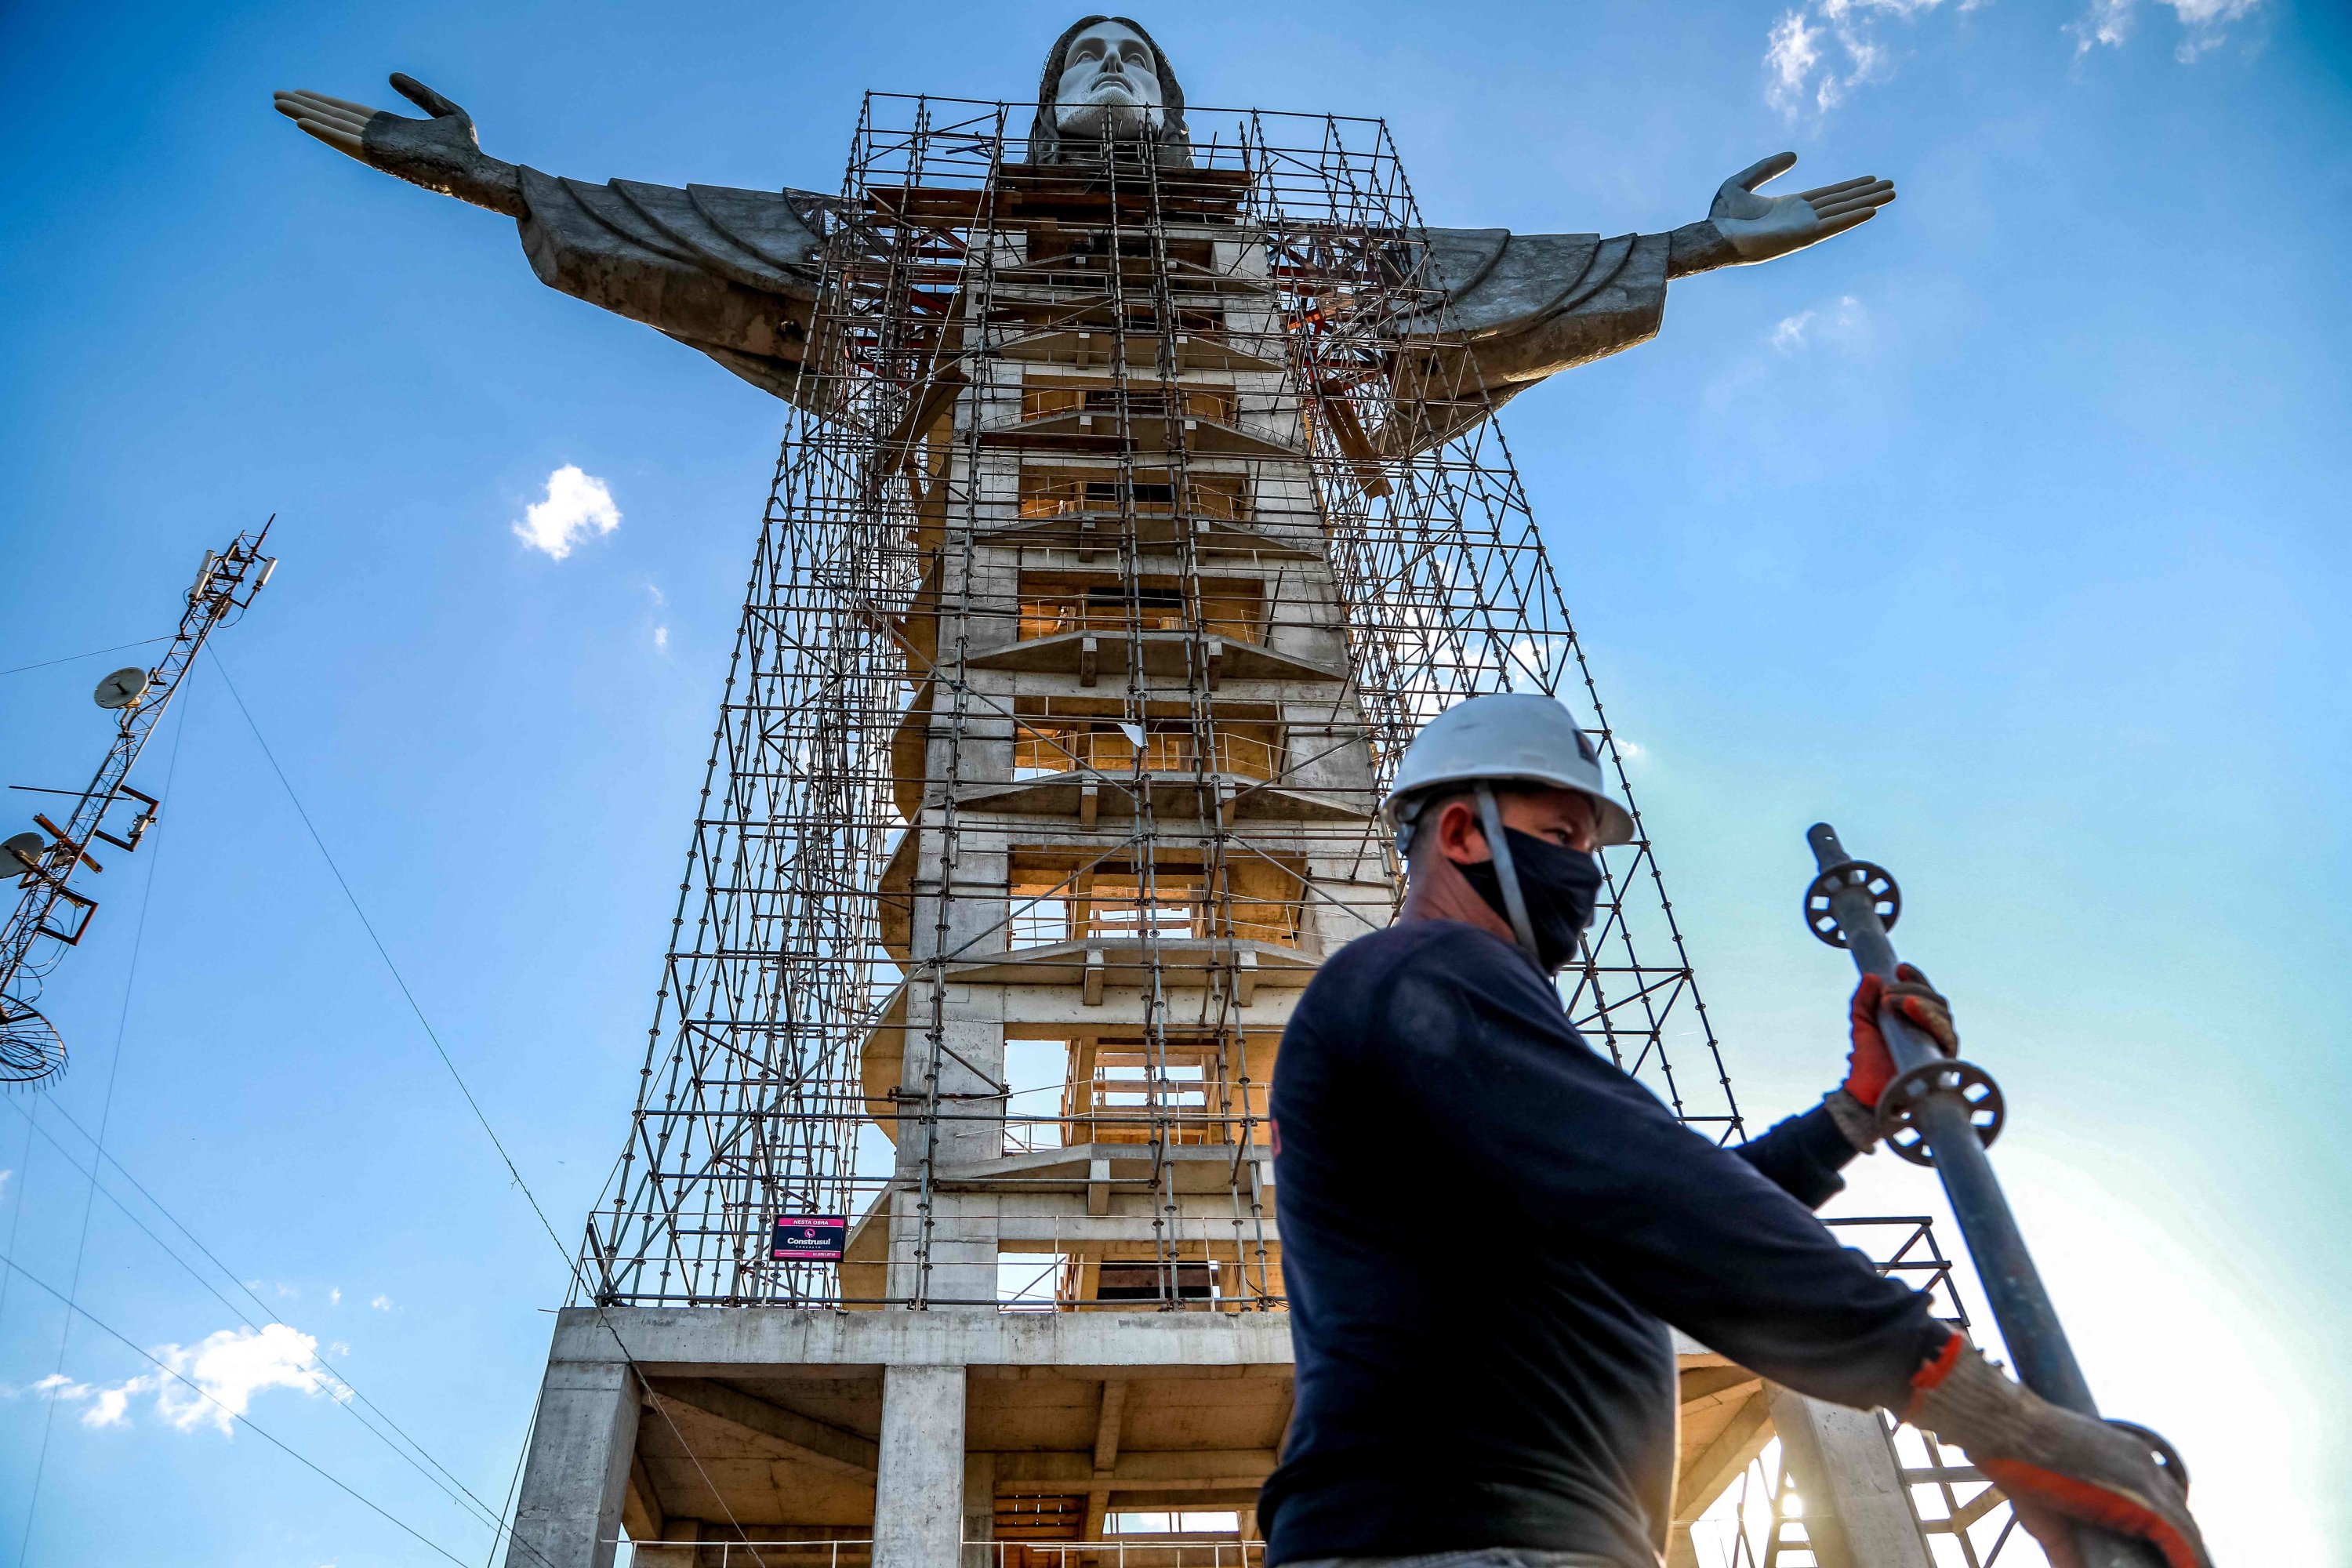 A worker is seen in front of the Christ statue being built in Encantado, Rio Grande do Sul state, Brazil, April 9, 2021. (AFP Photo)